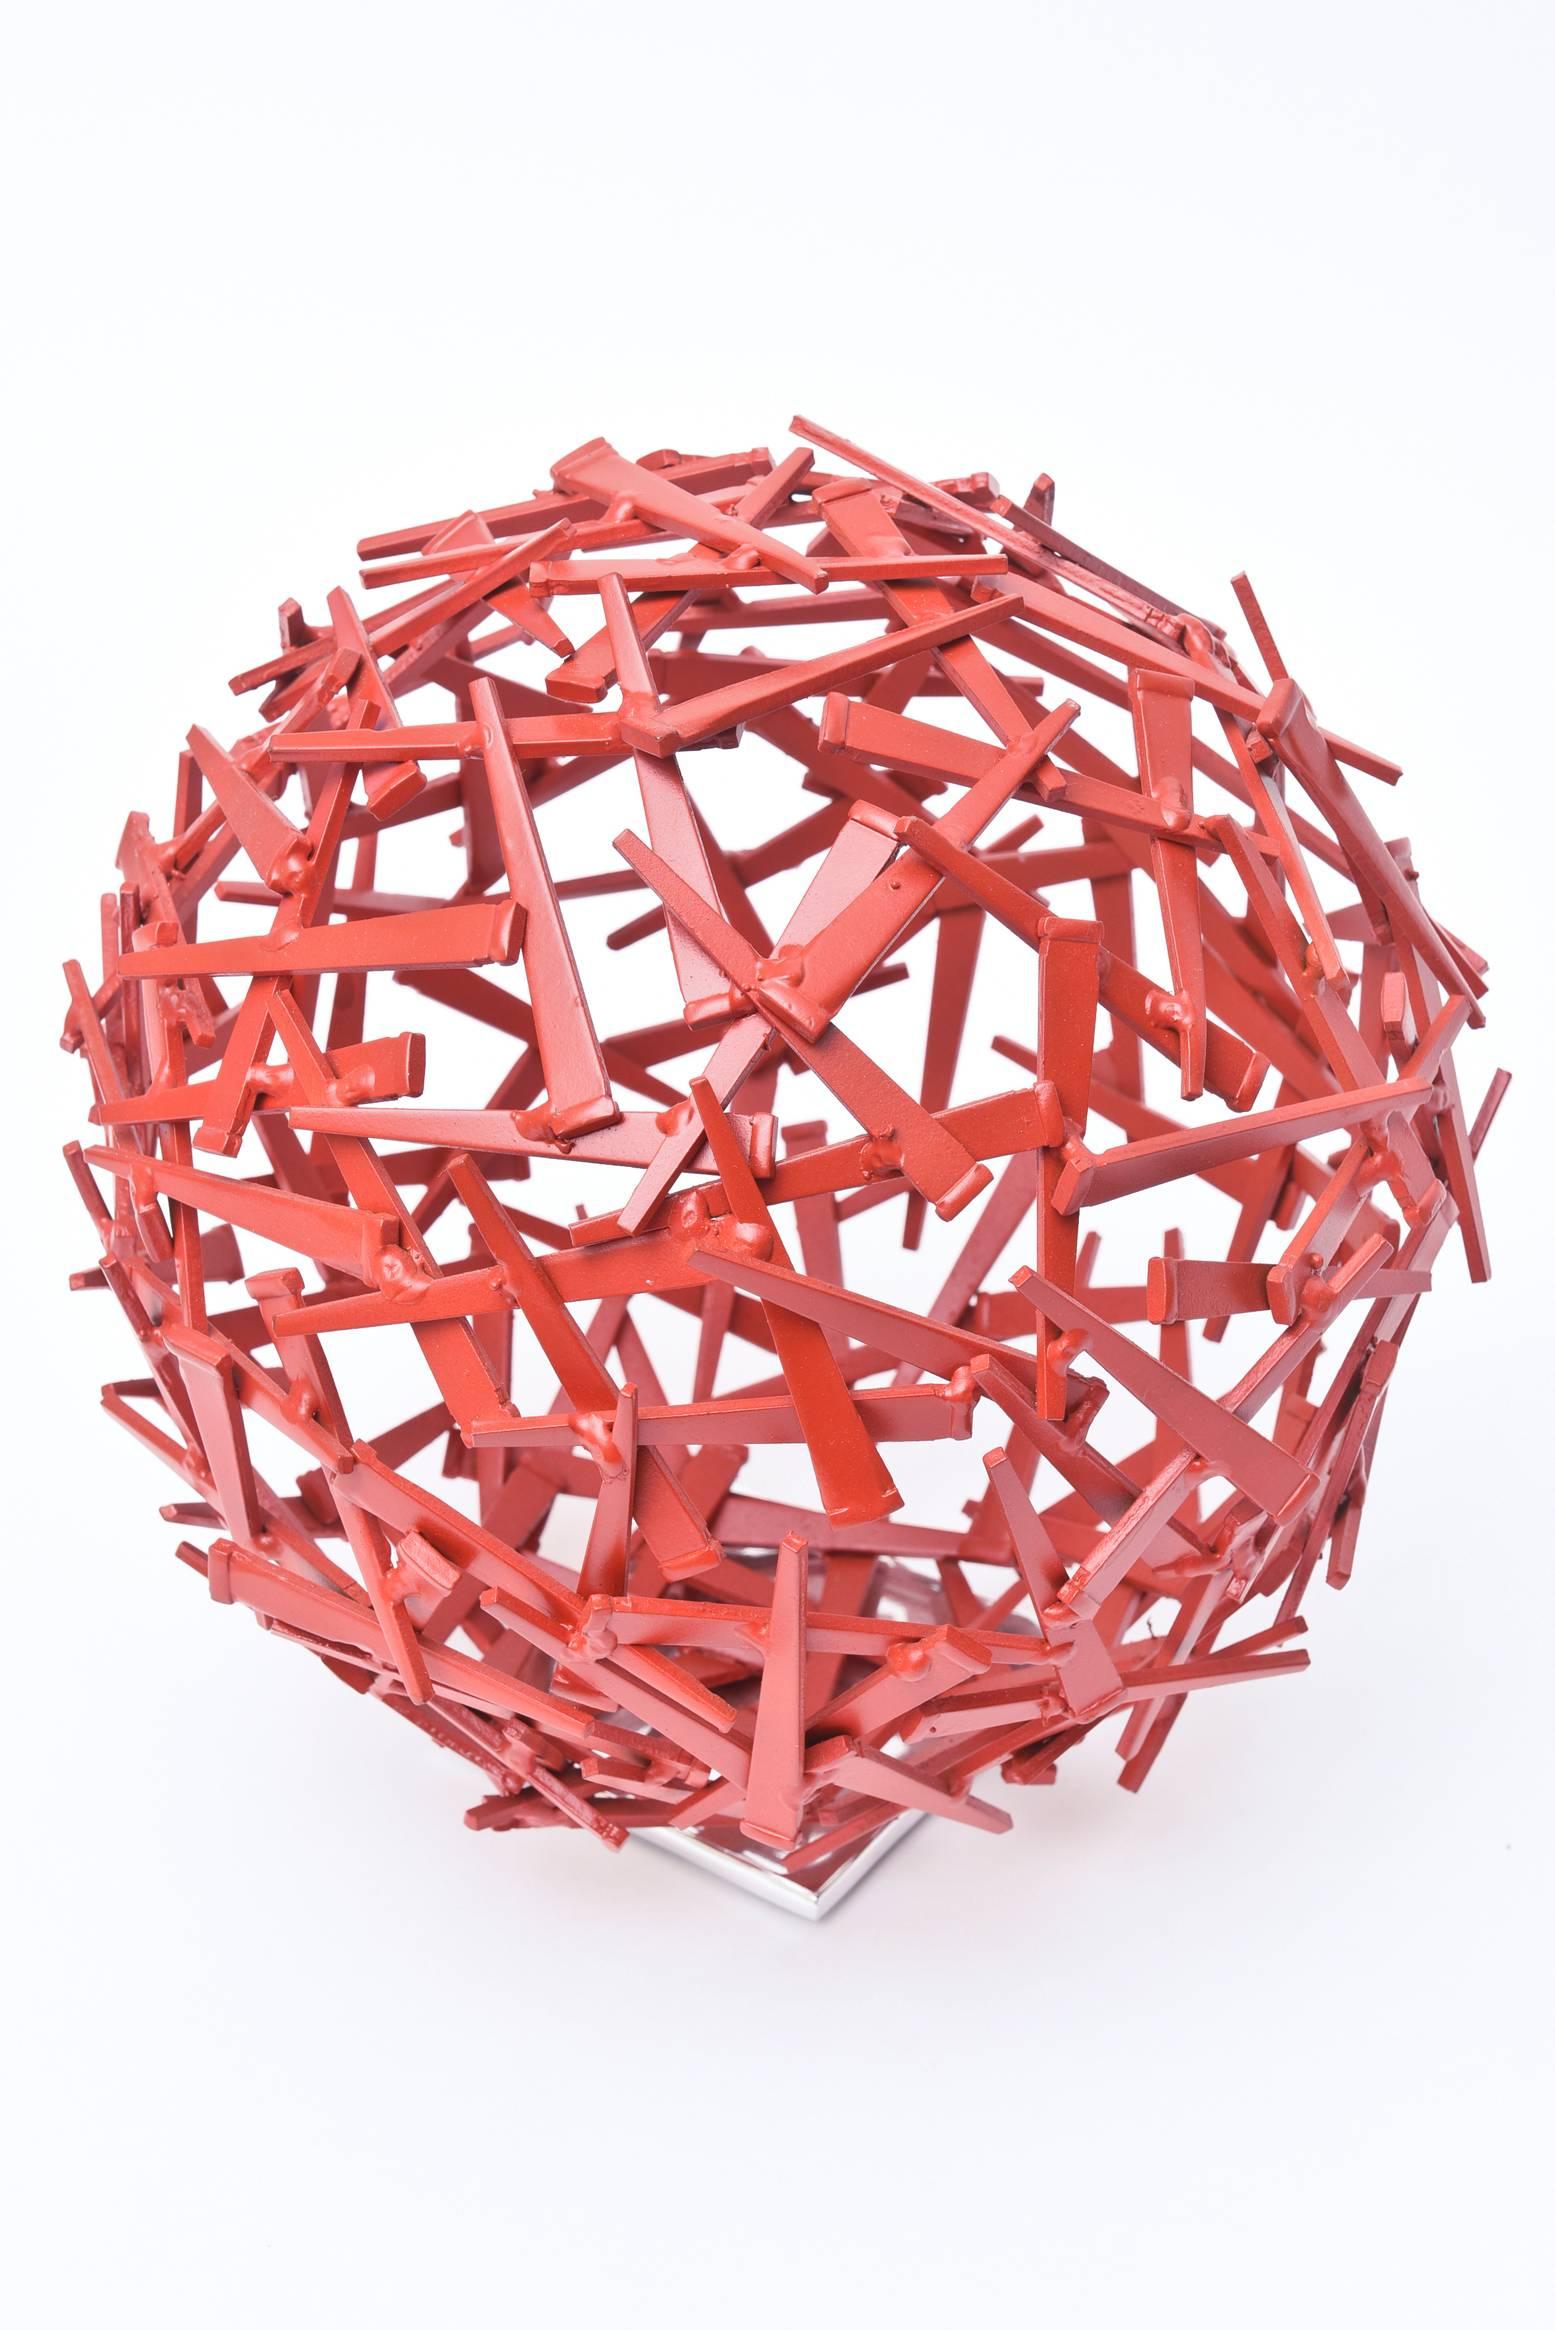 This dynamic wonderful globe like sphere sculpture has juxtaposed cement nails that are all paprika red enamel over steel going in abstract different directions. It sits on square chrome plated base. It is a limited edition sculpture by Glen Mayo.